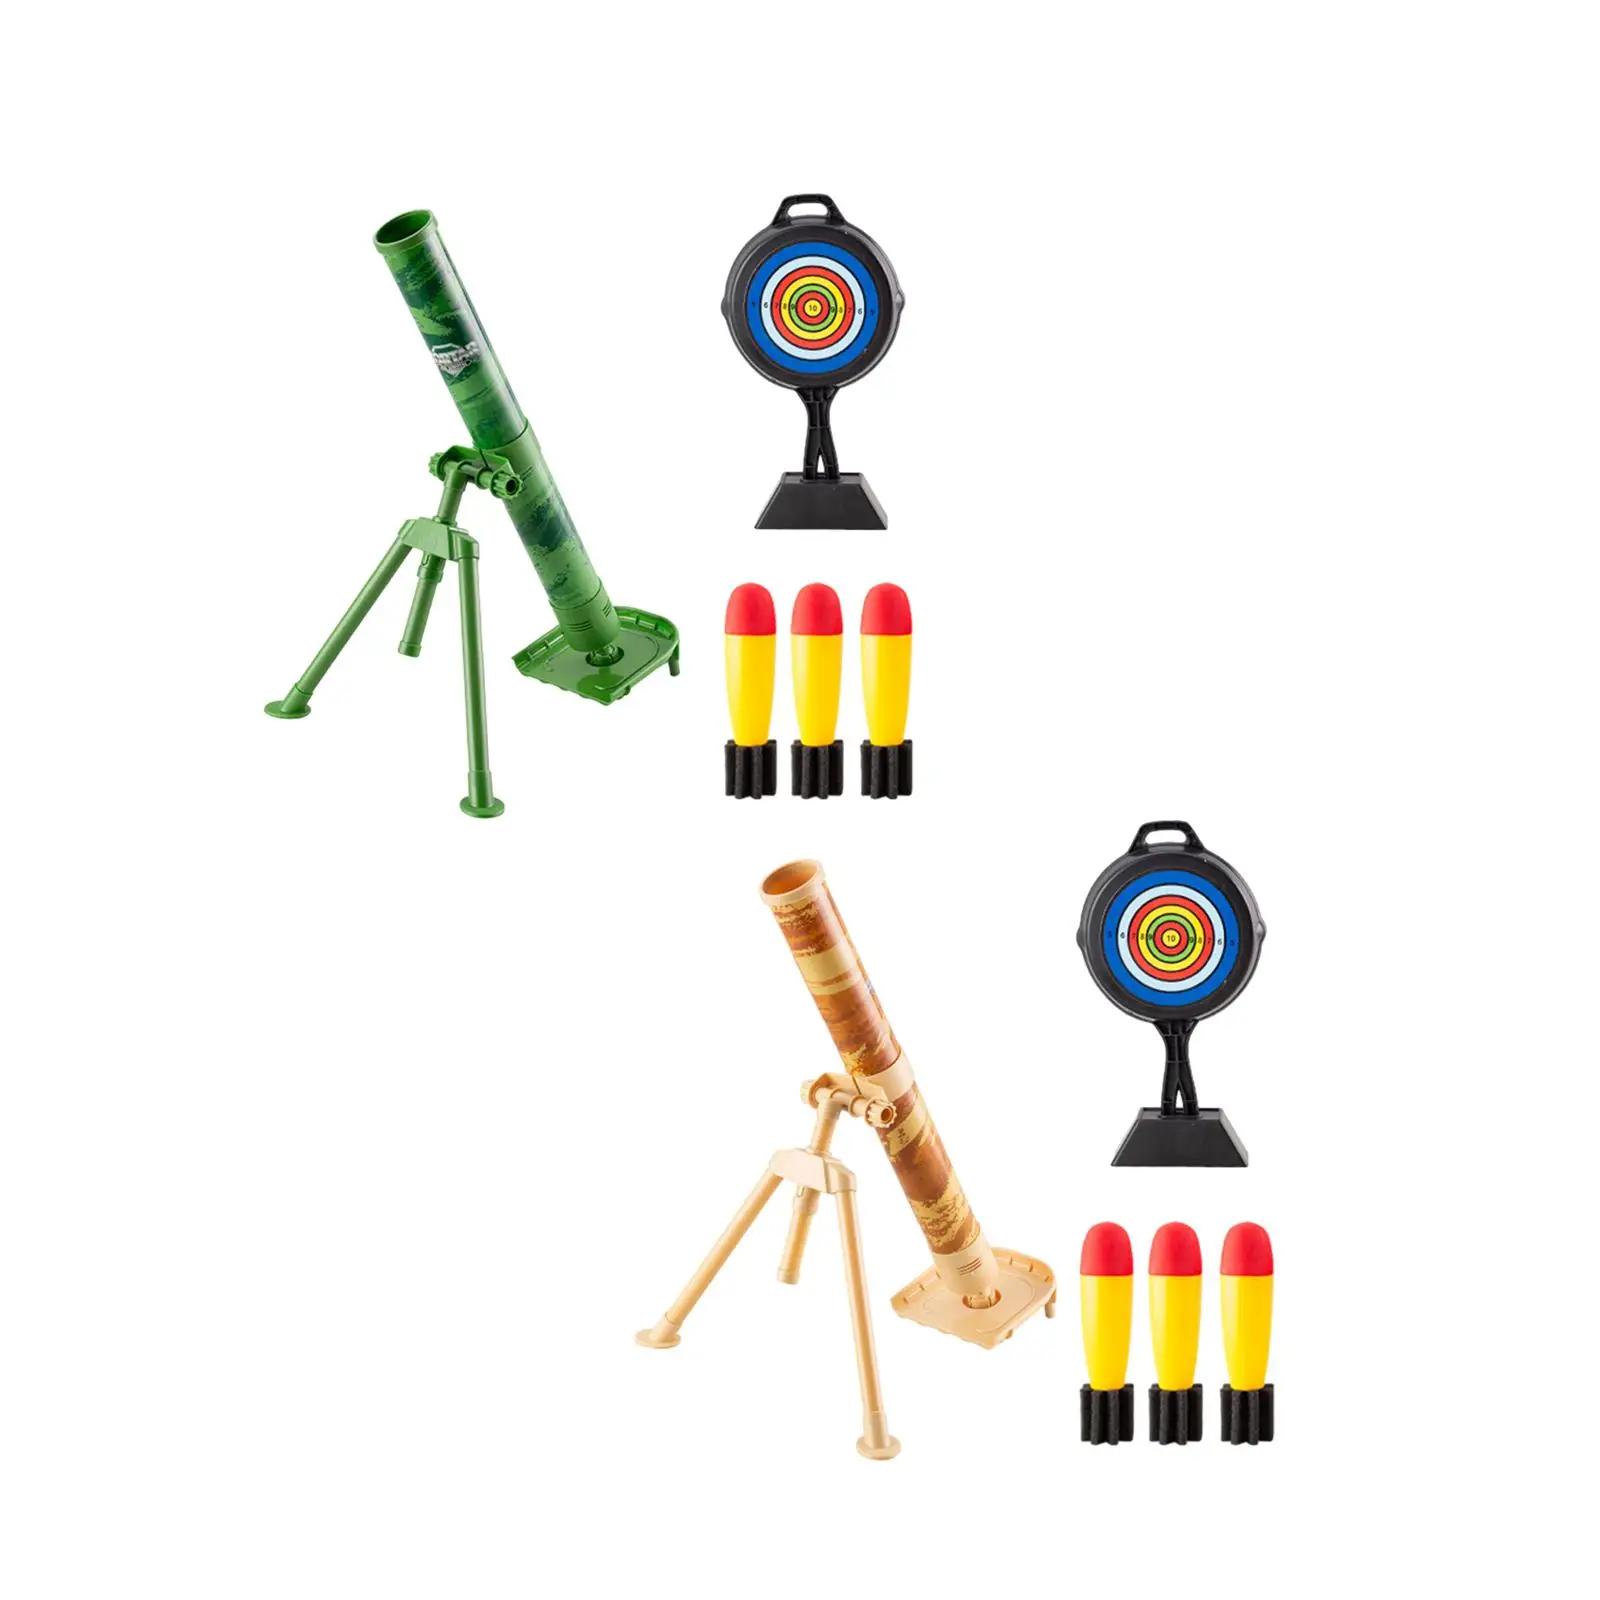 Mortar Launcher Toy Set Interactive Games with 3 Safety Foam Shells Play Game Kits Launch Set Chase Rocket Birthday Present